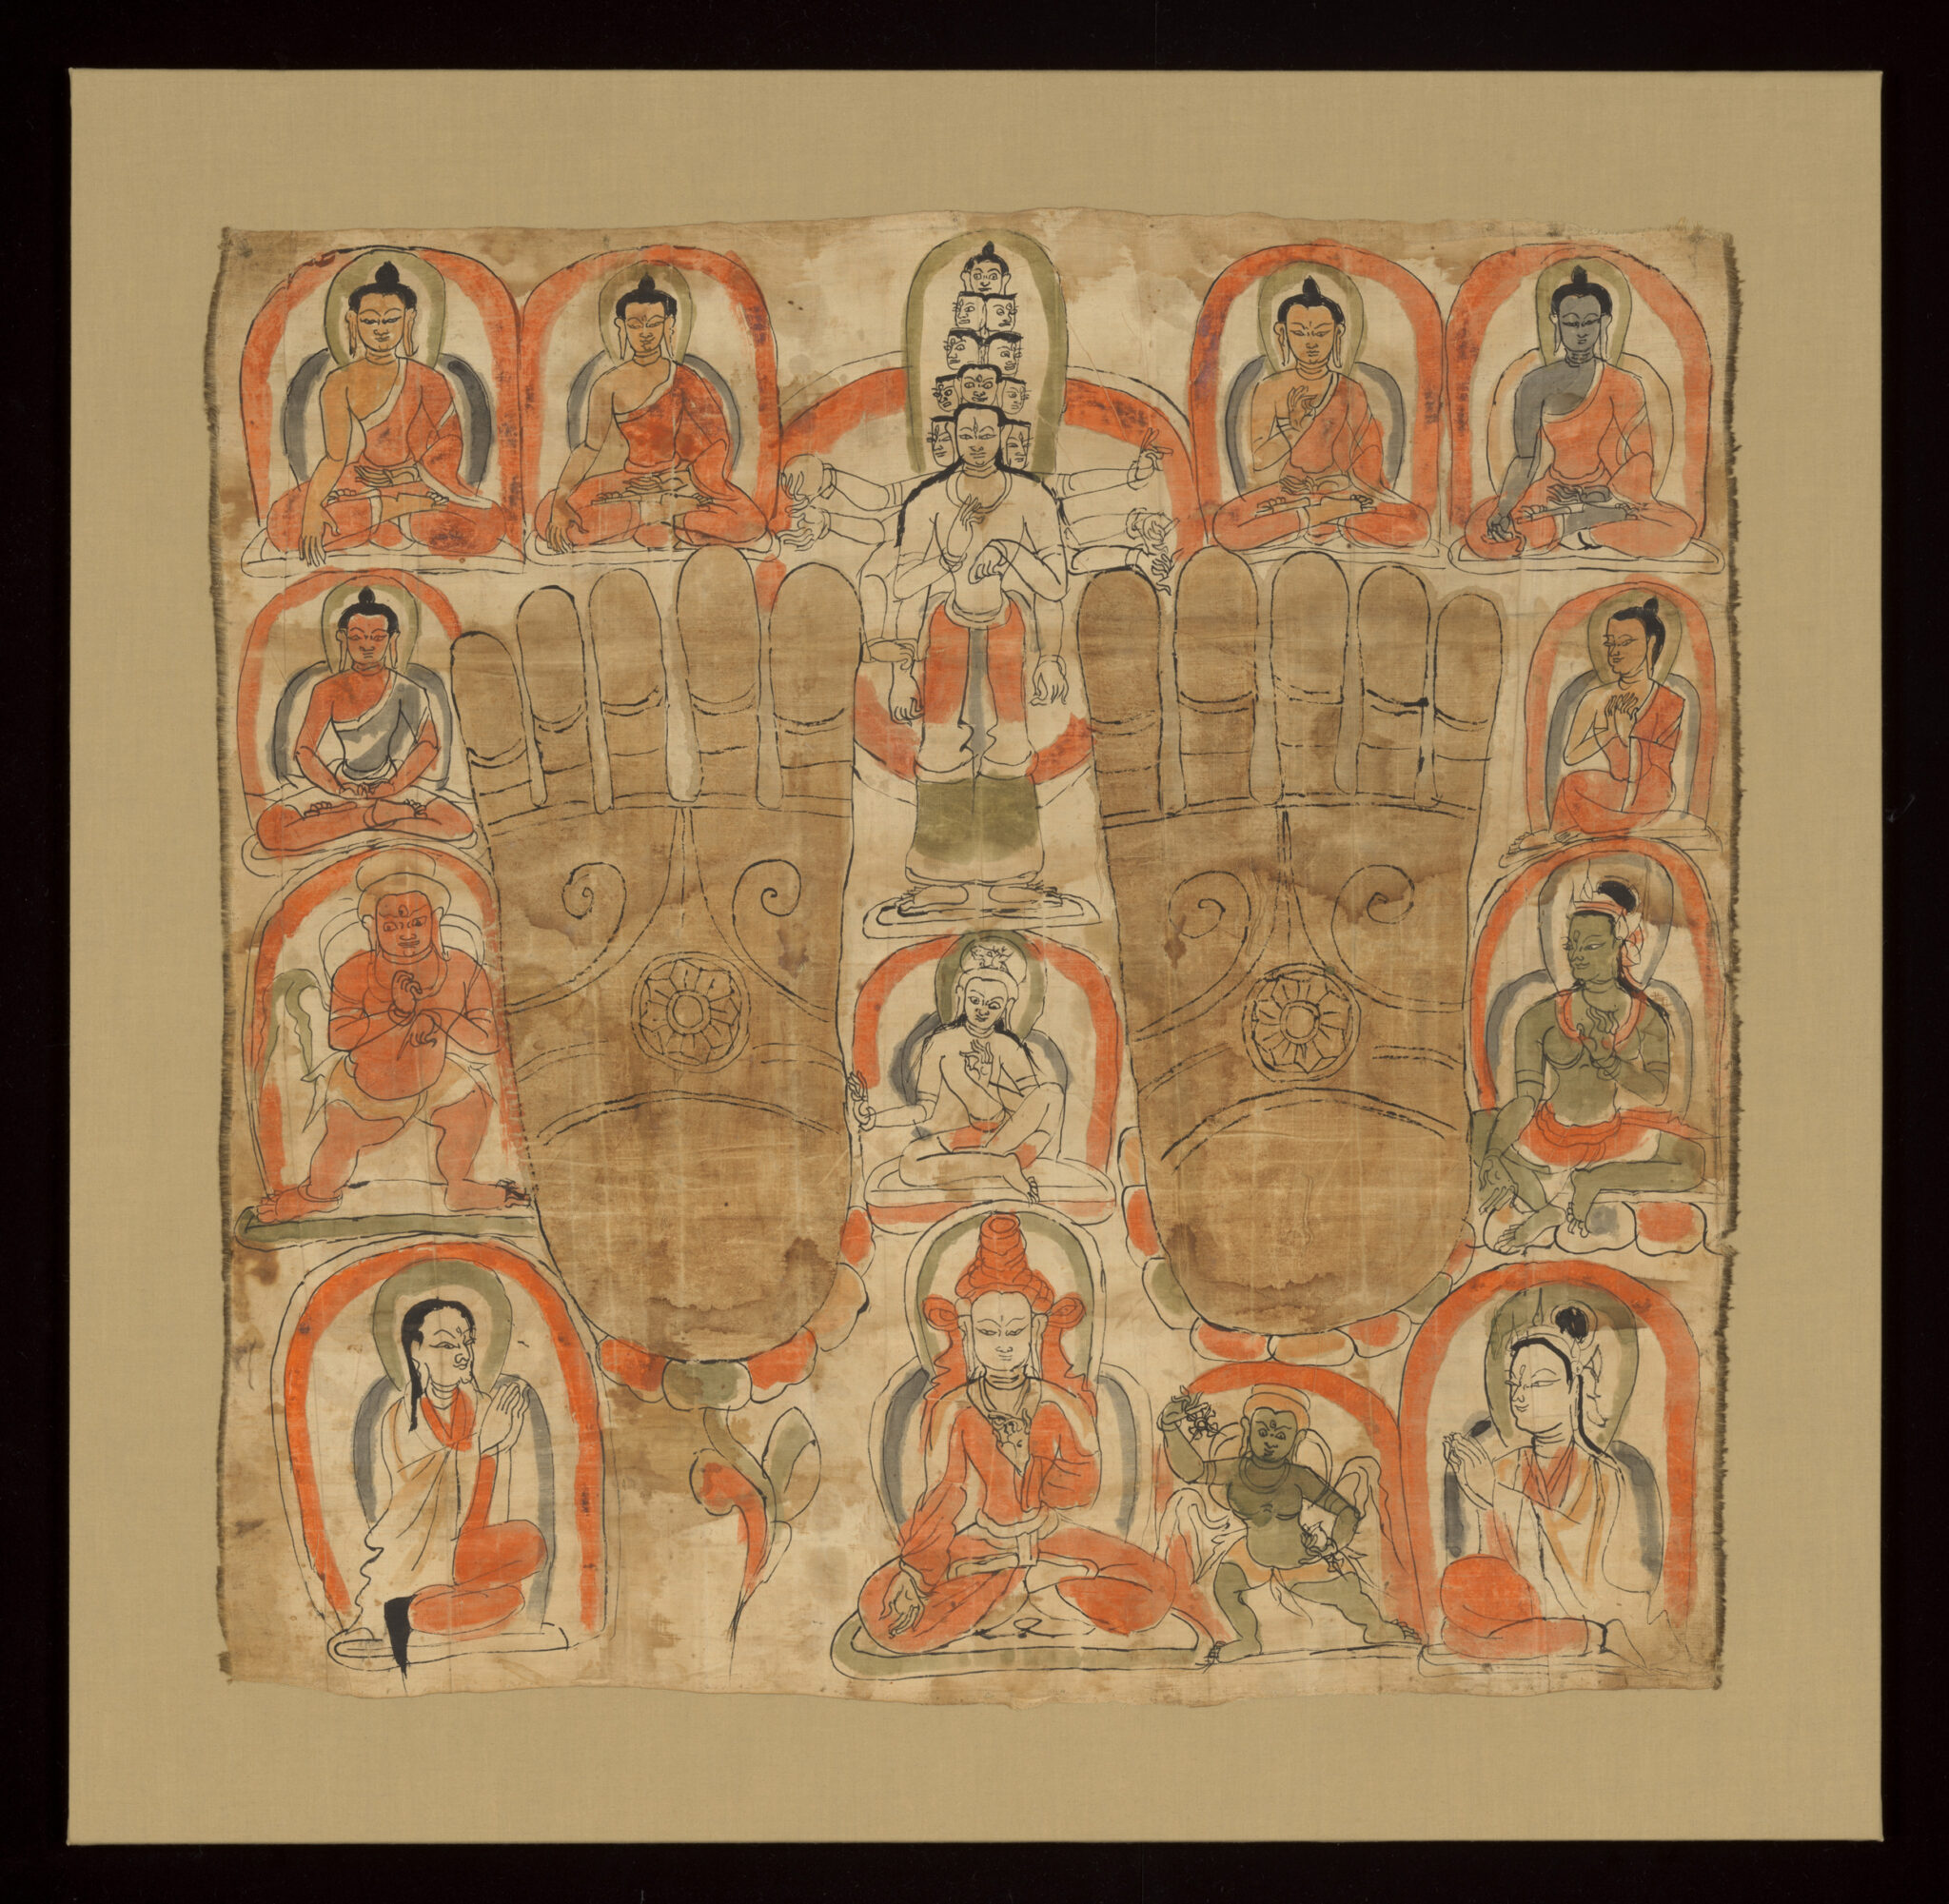 Sepia textile featuring two faint footprints interspersed with portraits of deities bearing orange nimbuses